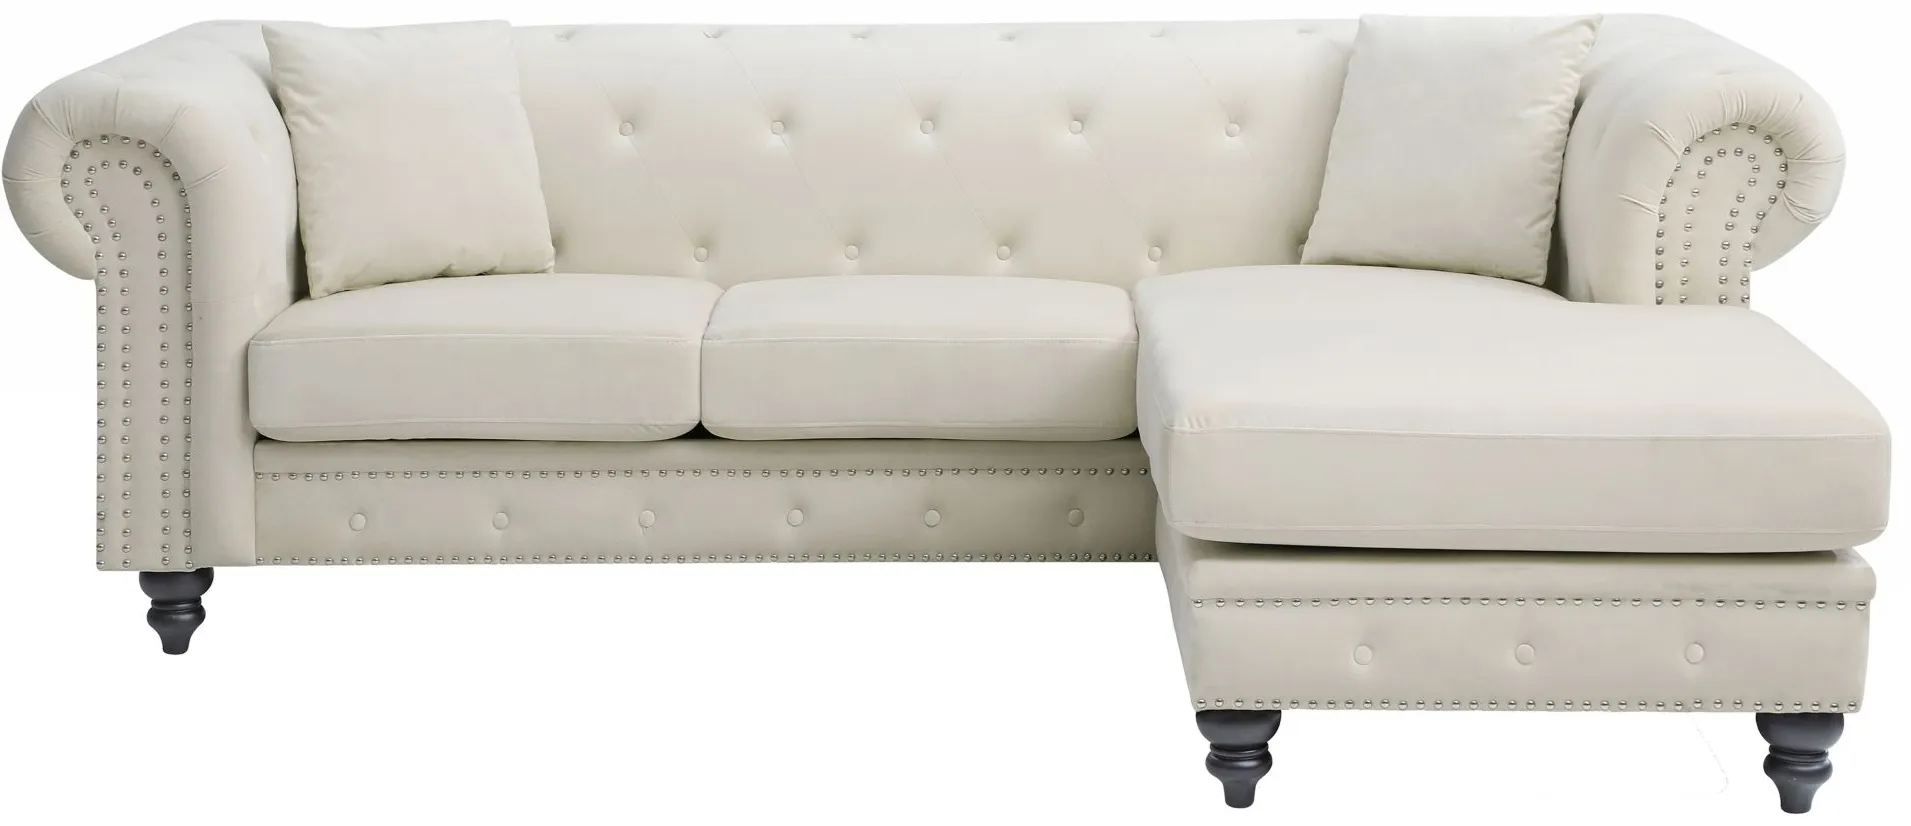 Nola 2-pc. Sectional Sofa in Ivory by Glory Furniture